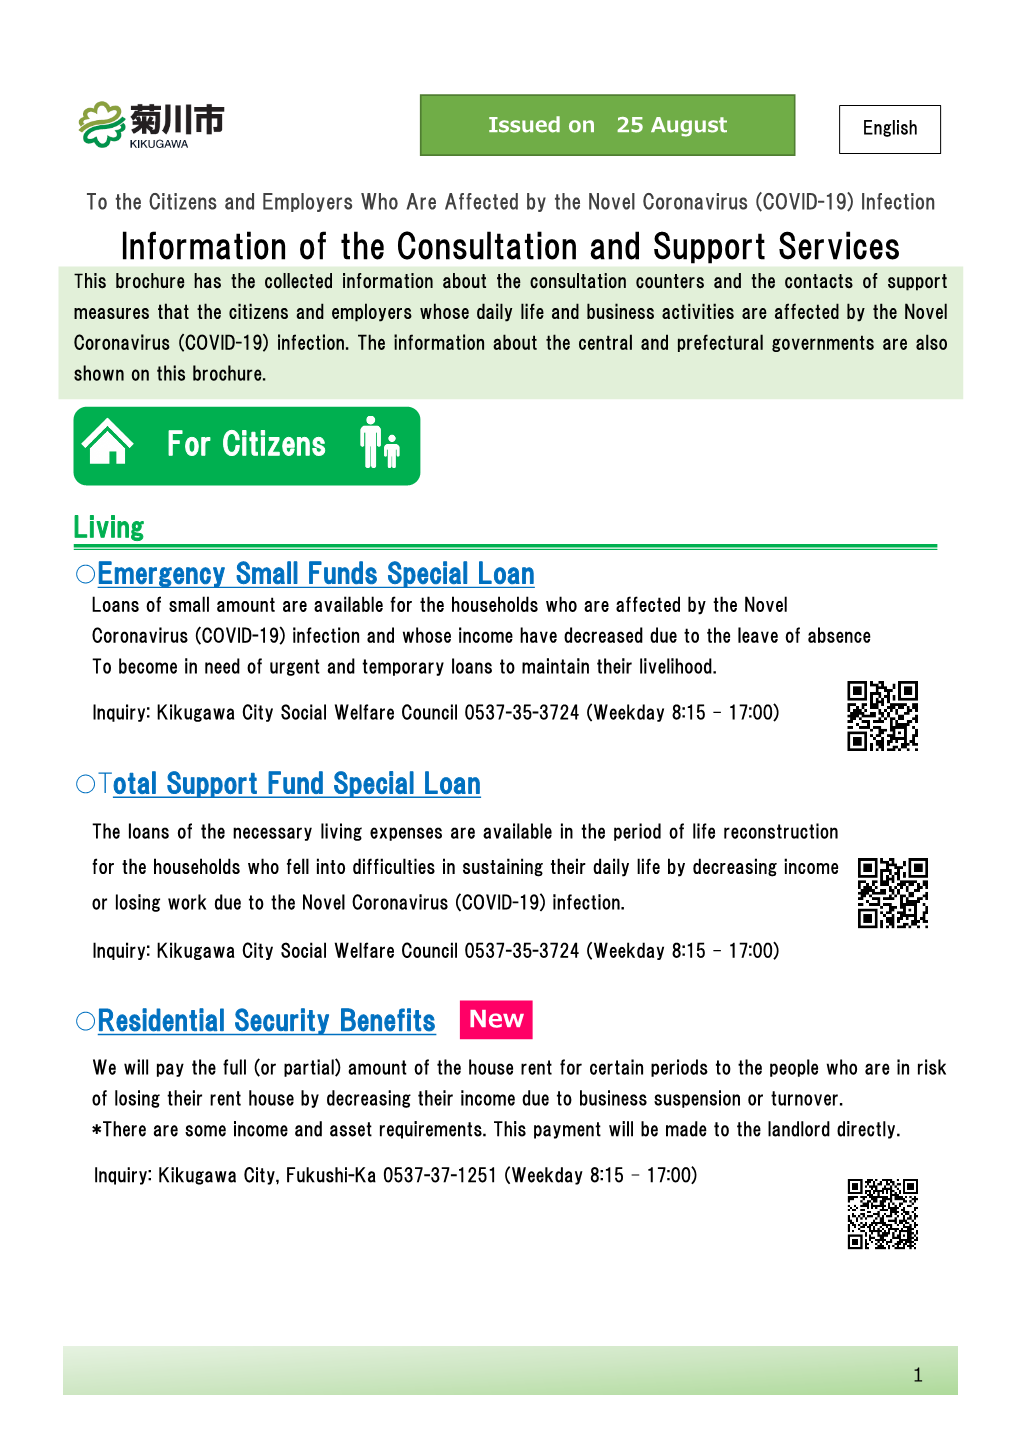 Information of the Consultation and Support Services